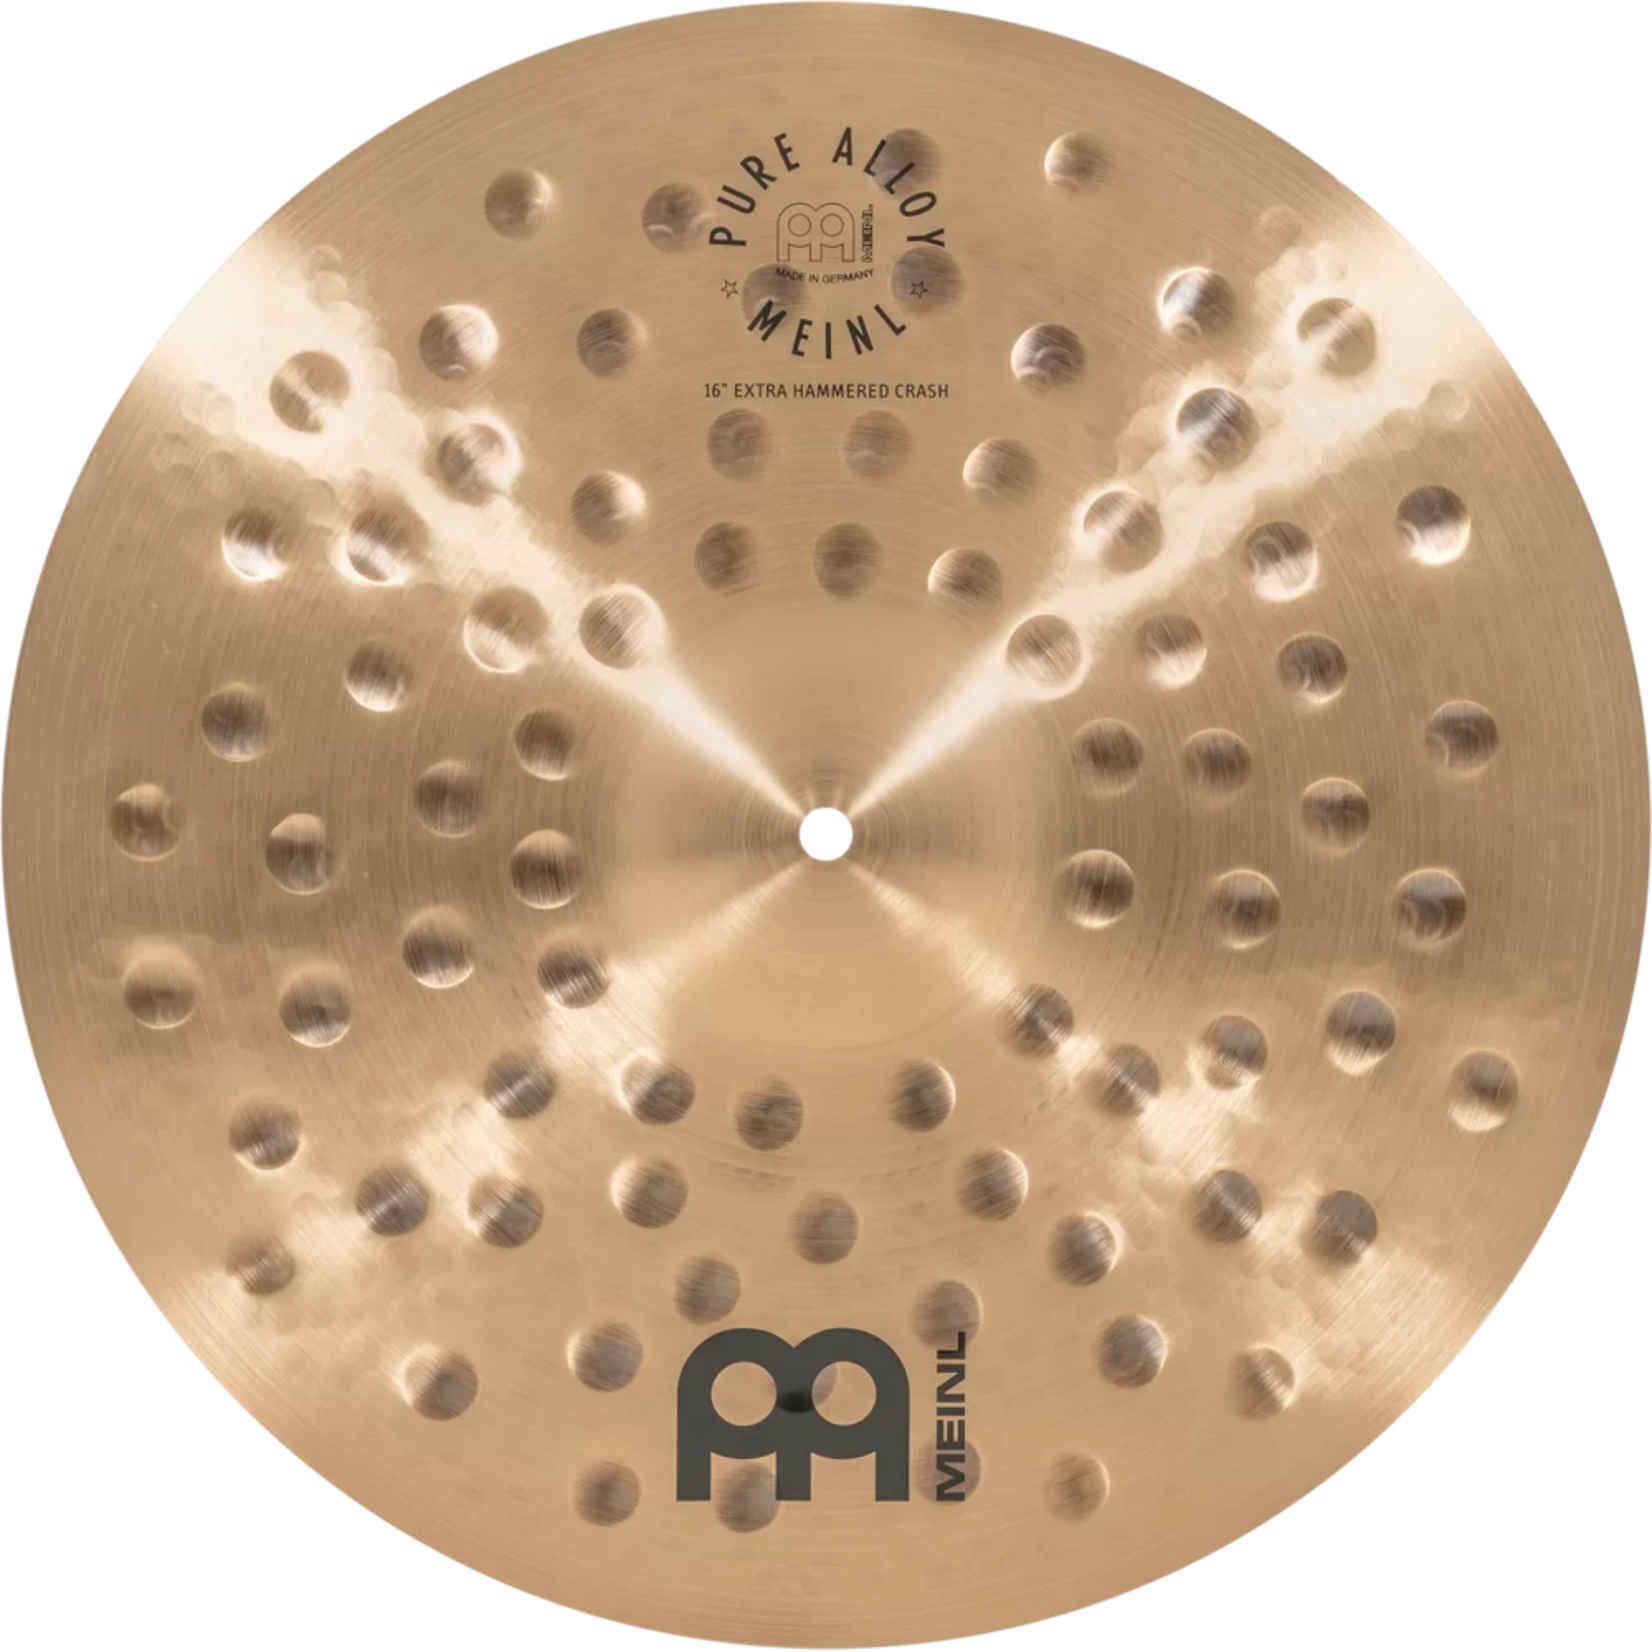 Meinl Meinl Pure Alloy 16" Extra Hammered Crash PA16EHC